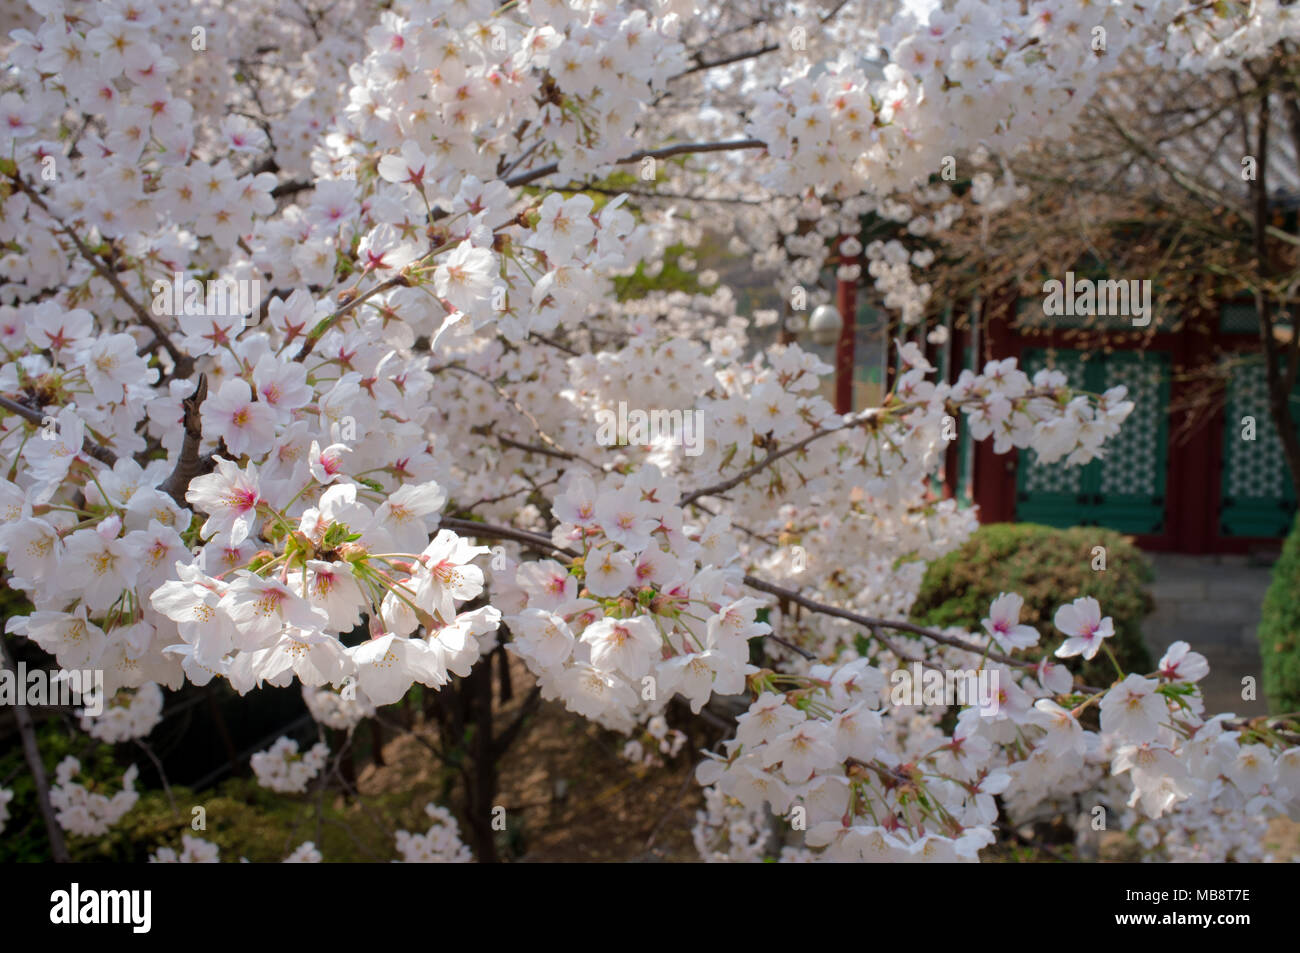 Cherry blossoms in bloom in the garden of a buddhist temple at Dongguk University in Seoul, South Korea. Stock Photo